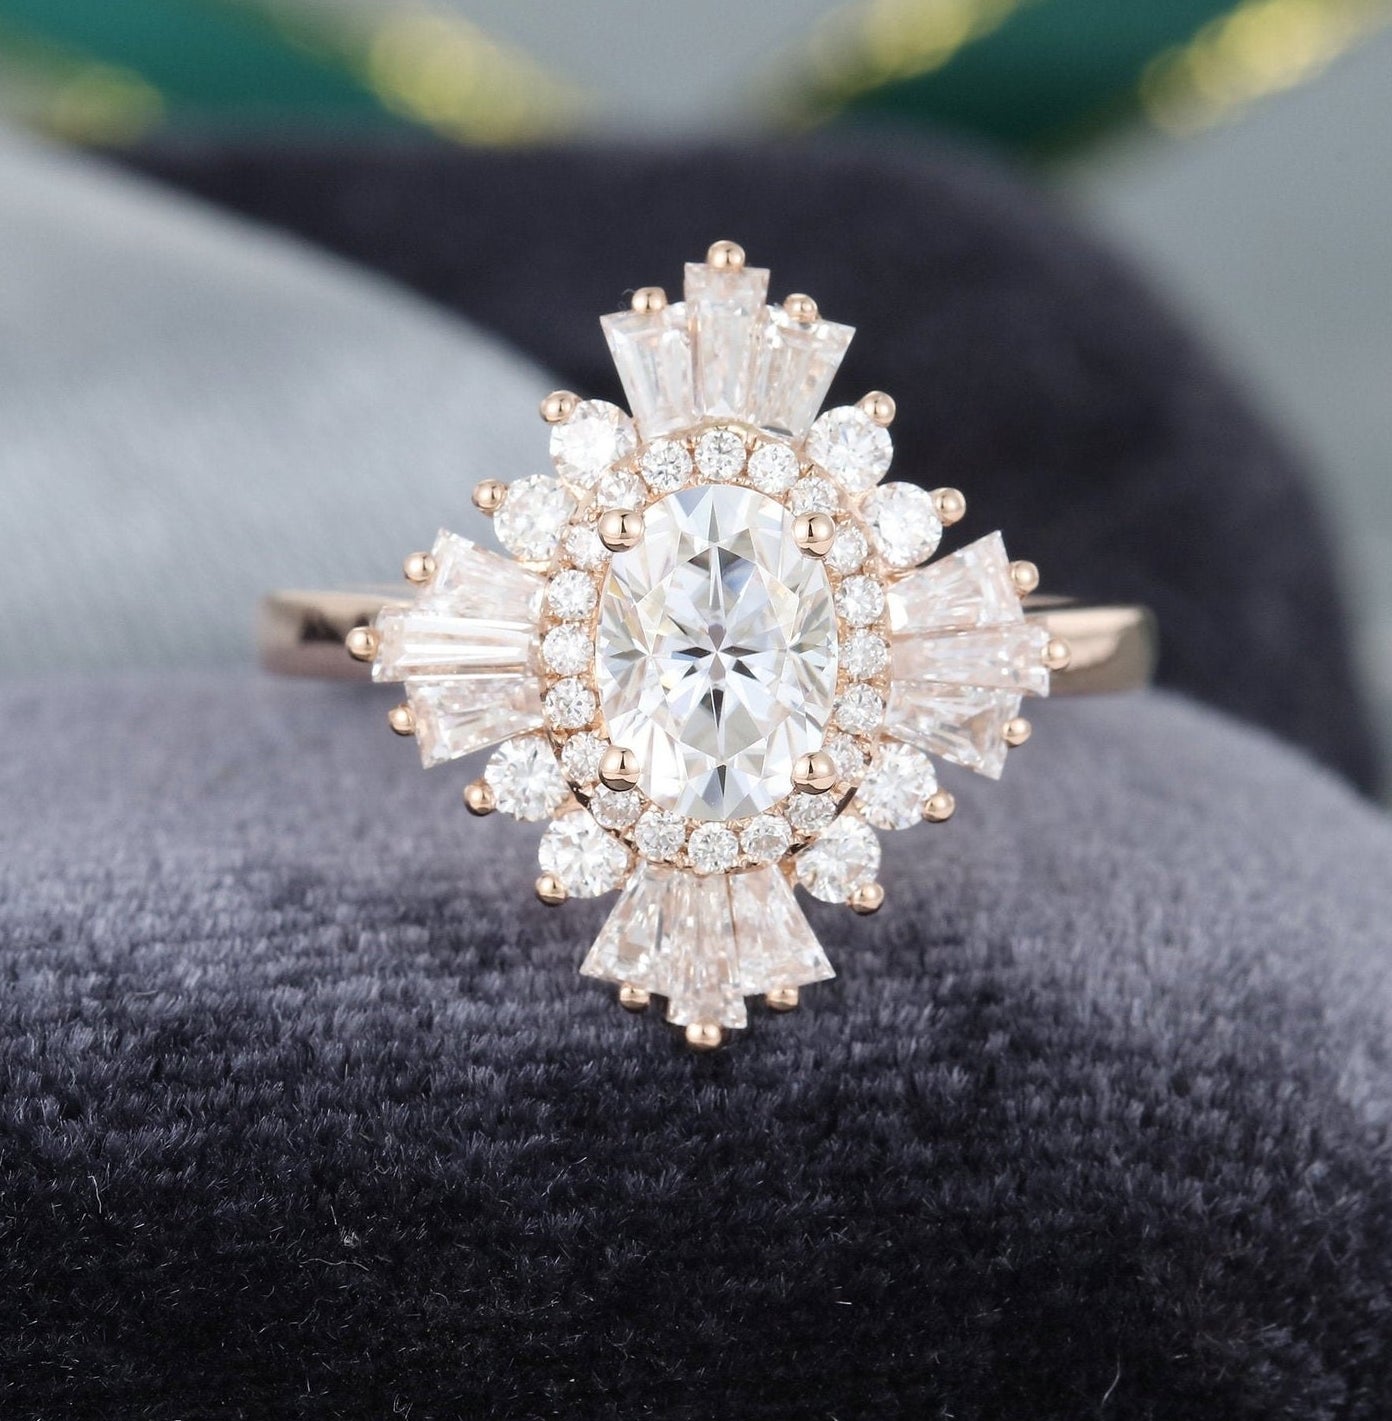 the oval ring with rectangular diamonds around it